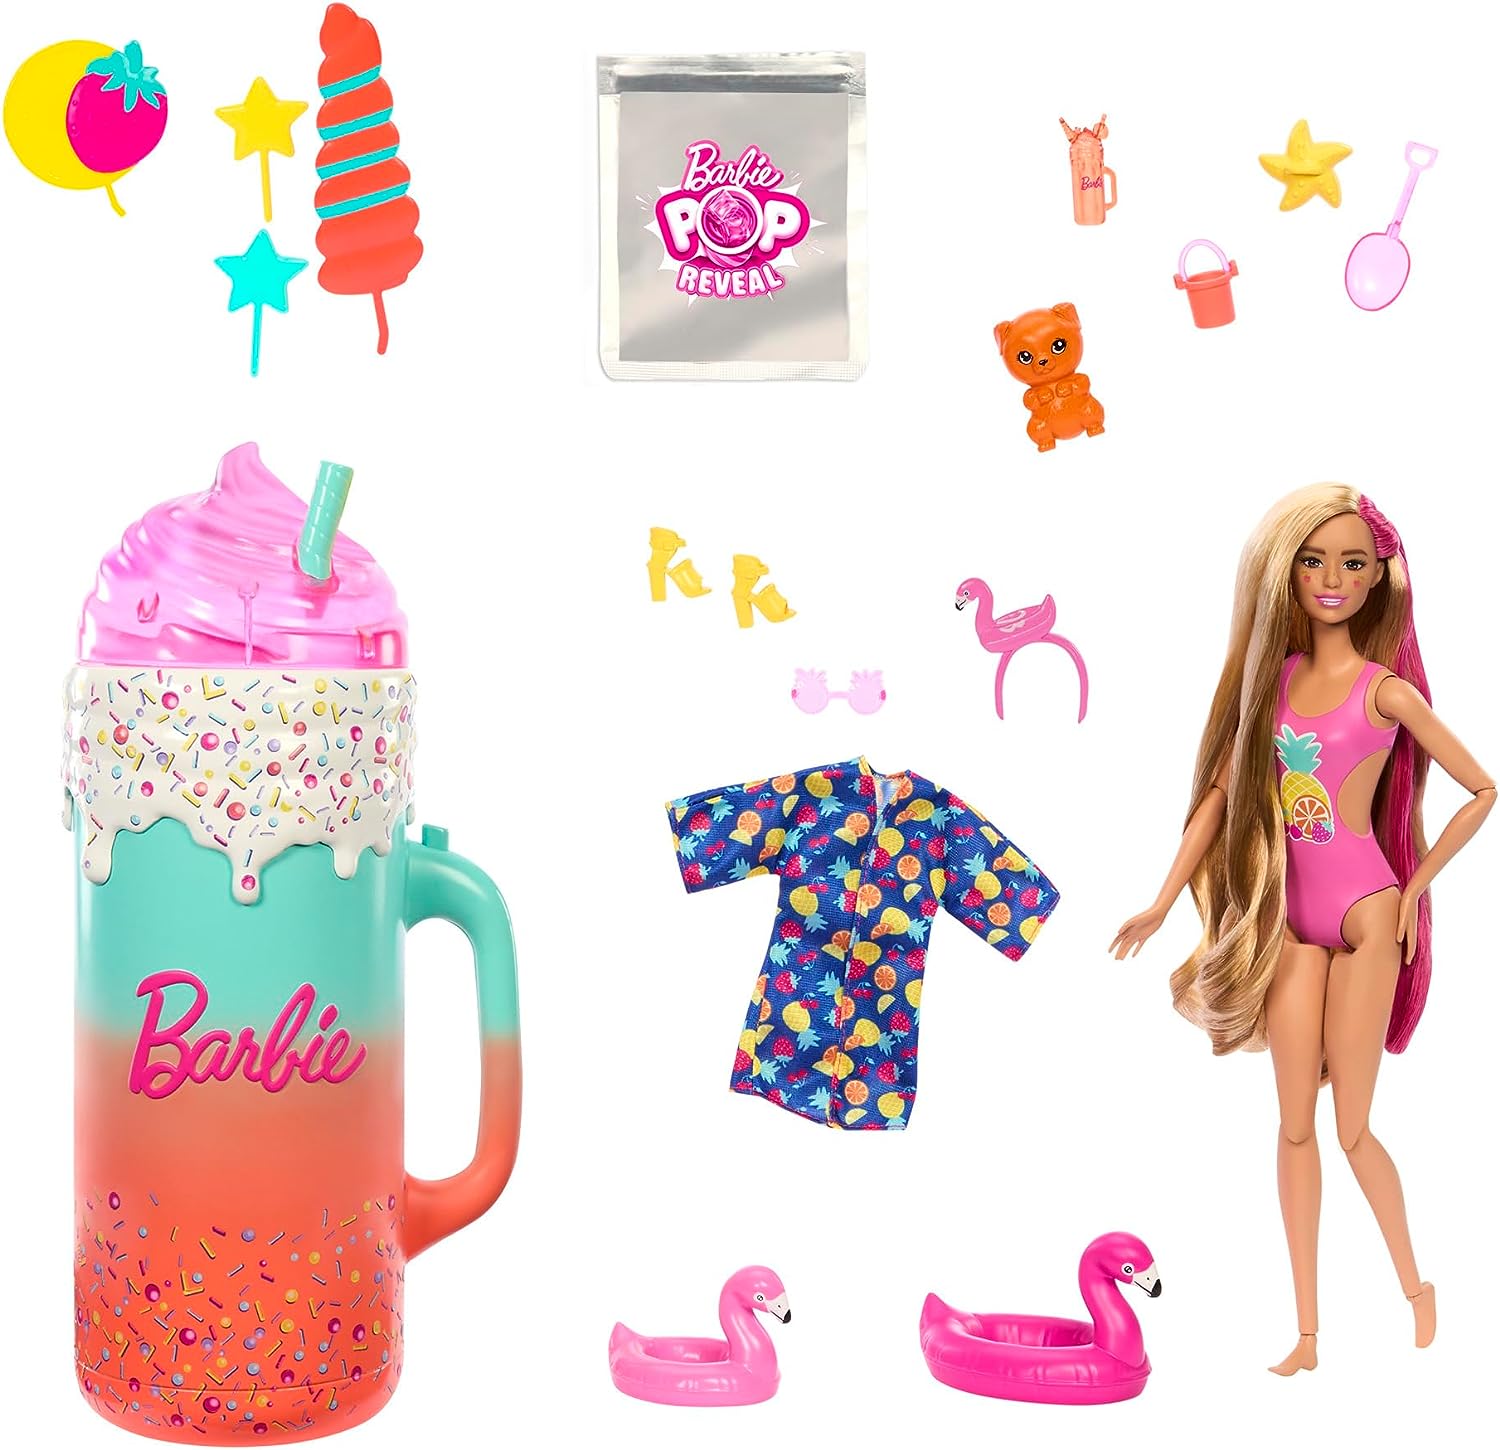 https://www.youloveit.com/uploads/posts/2023-09/1693556677_youloveit_com_barbie_pop_reveal_rise_and_surprise_doll_giftset.jpg